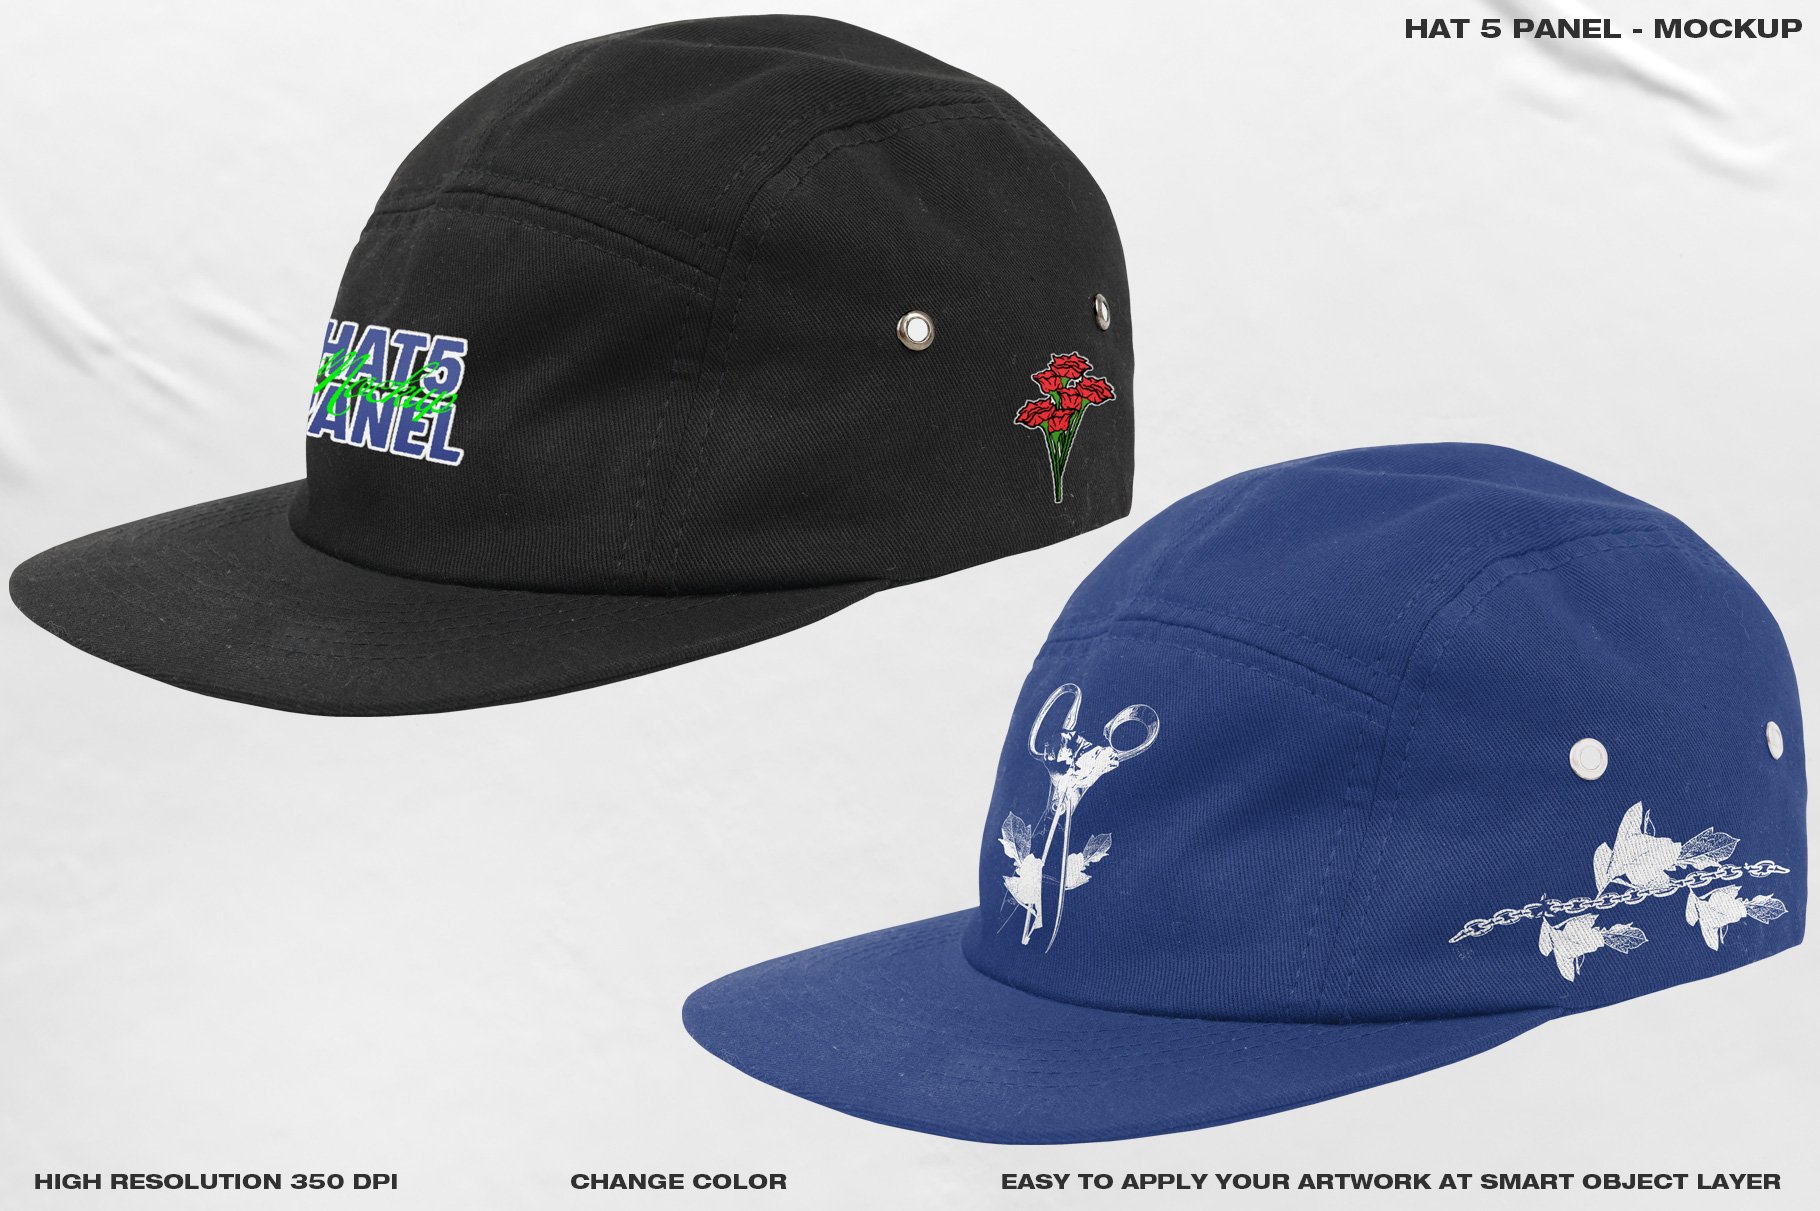 Hat 5 Panel - Mockup preview image.